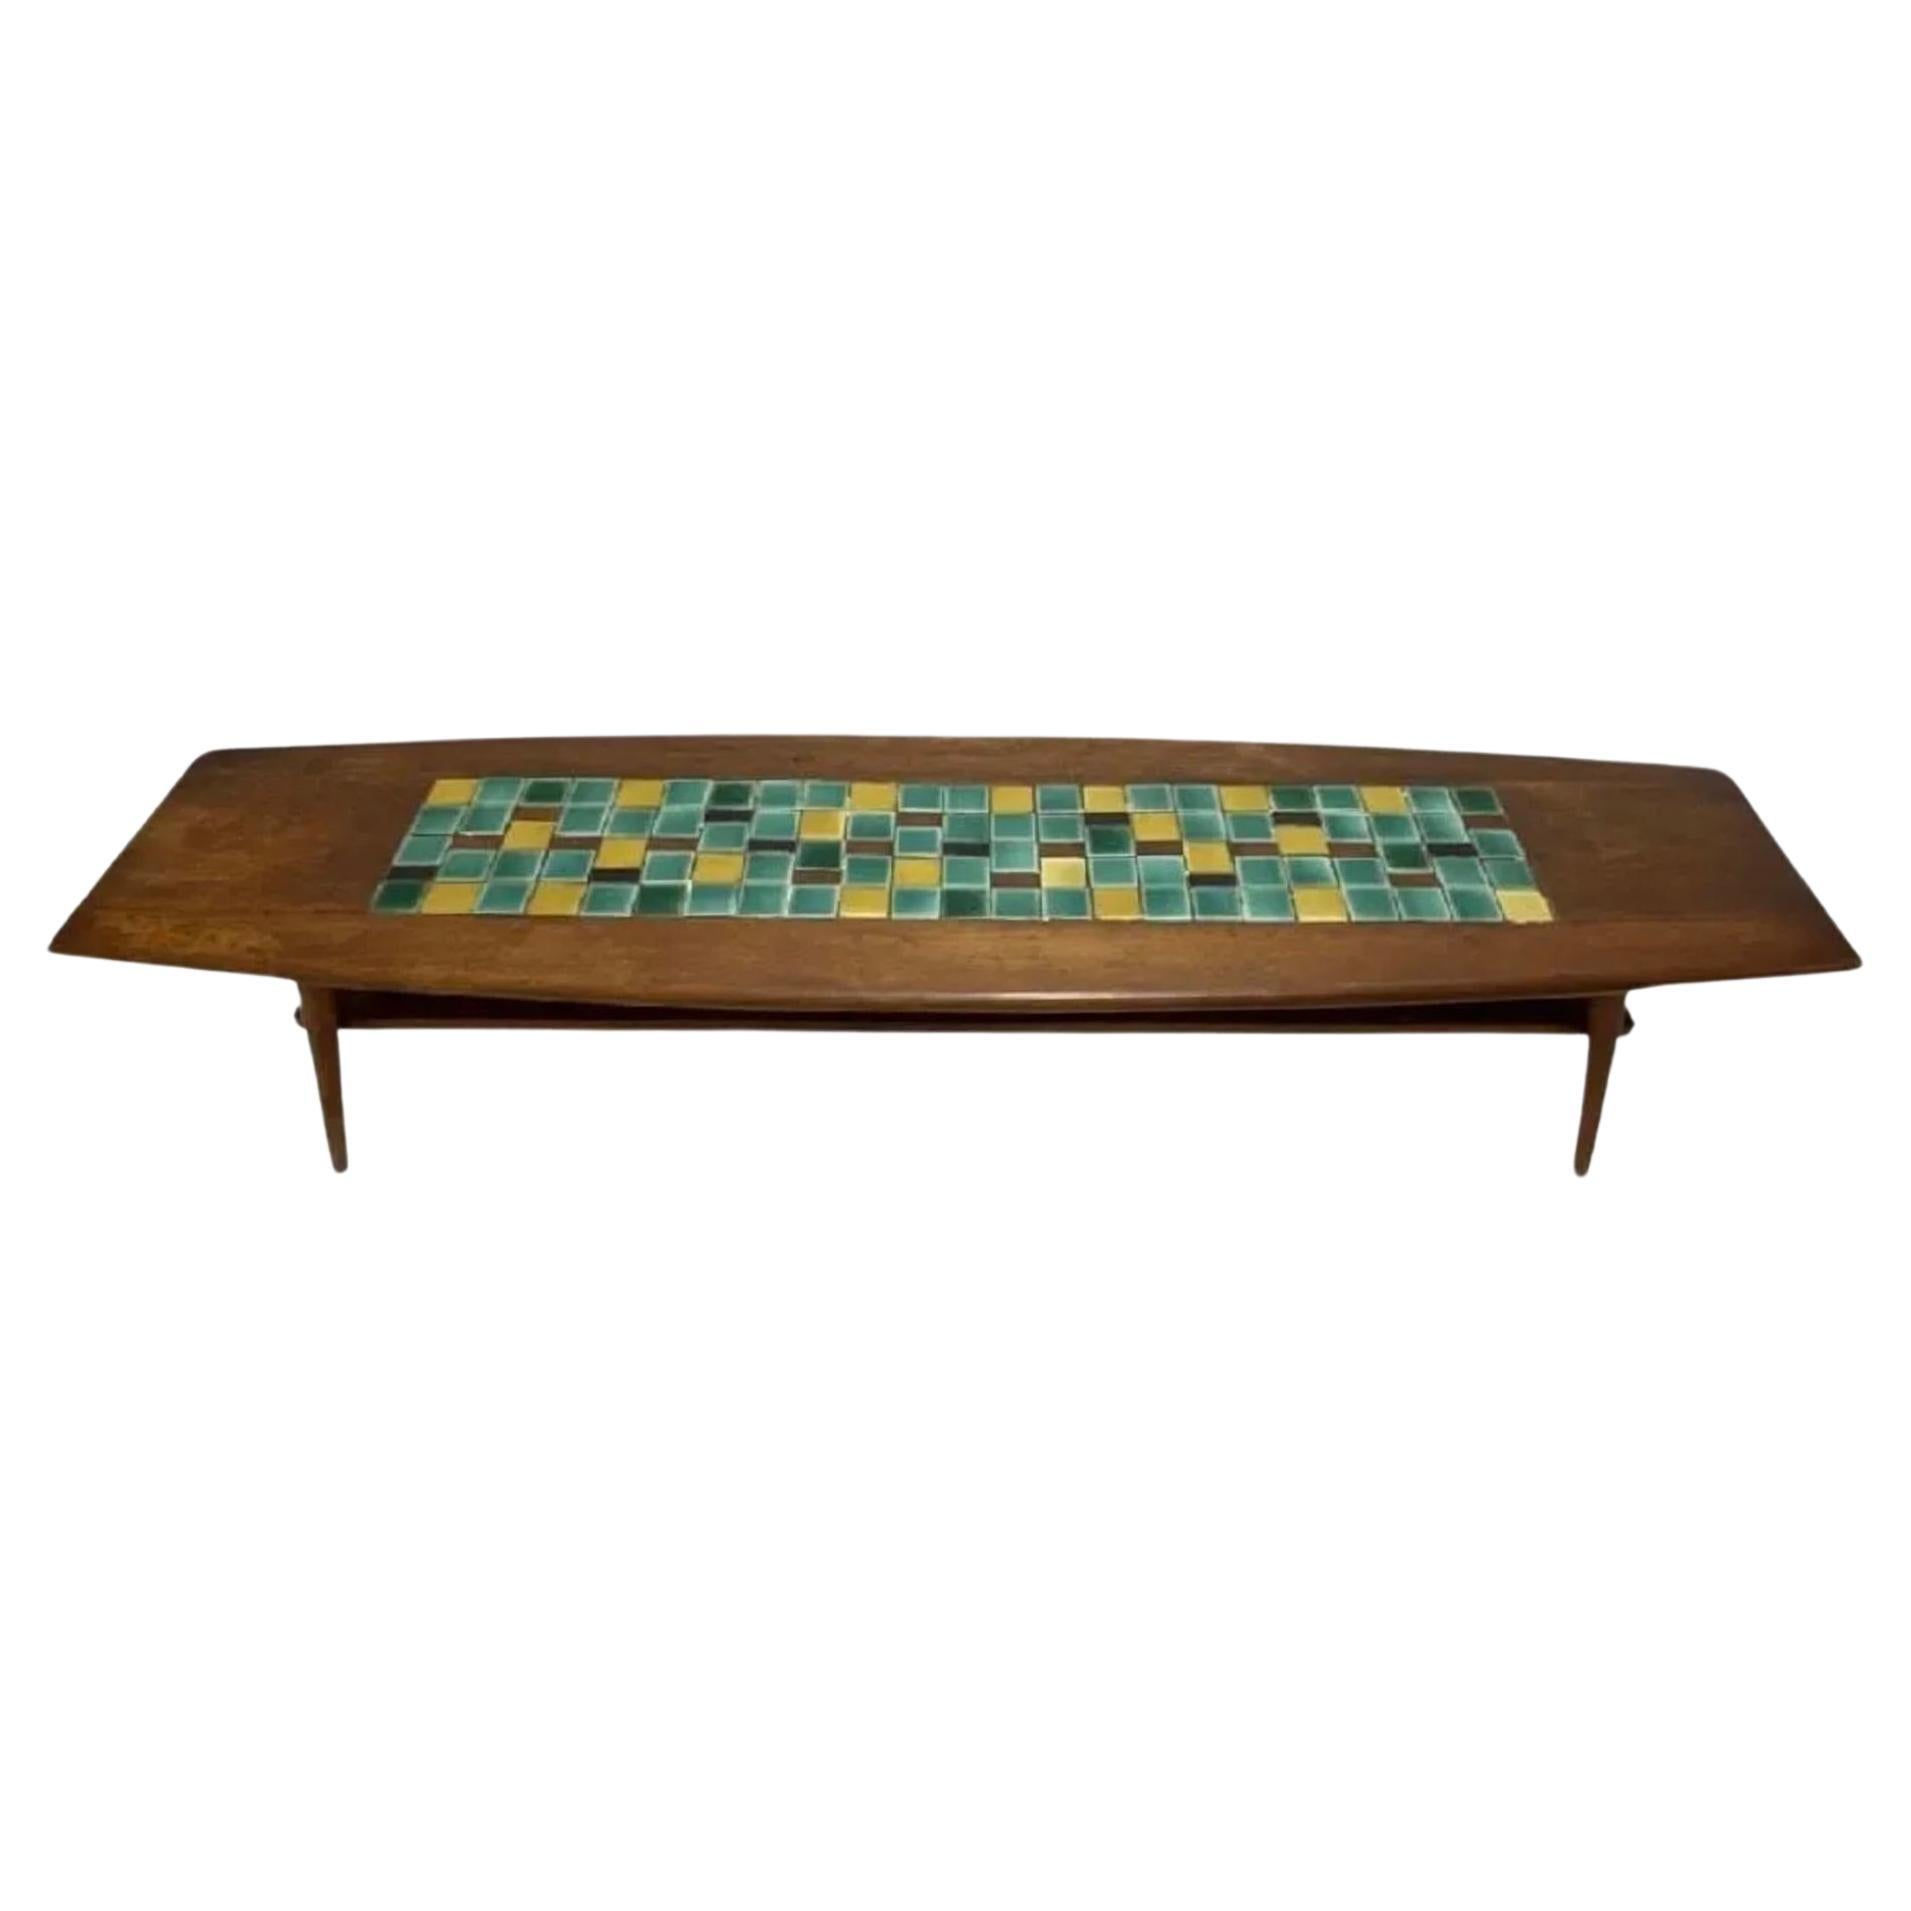 Mid century modern walnut tapered coffee table with colorful ceramic tiles lower